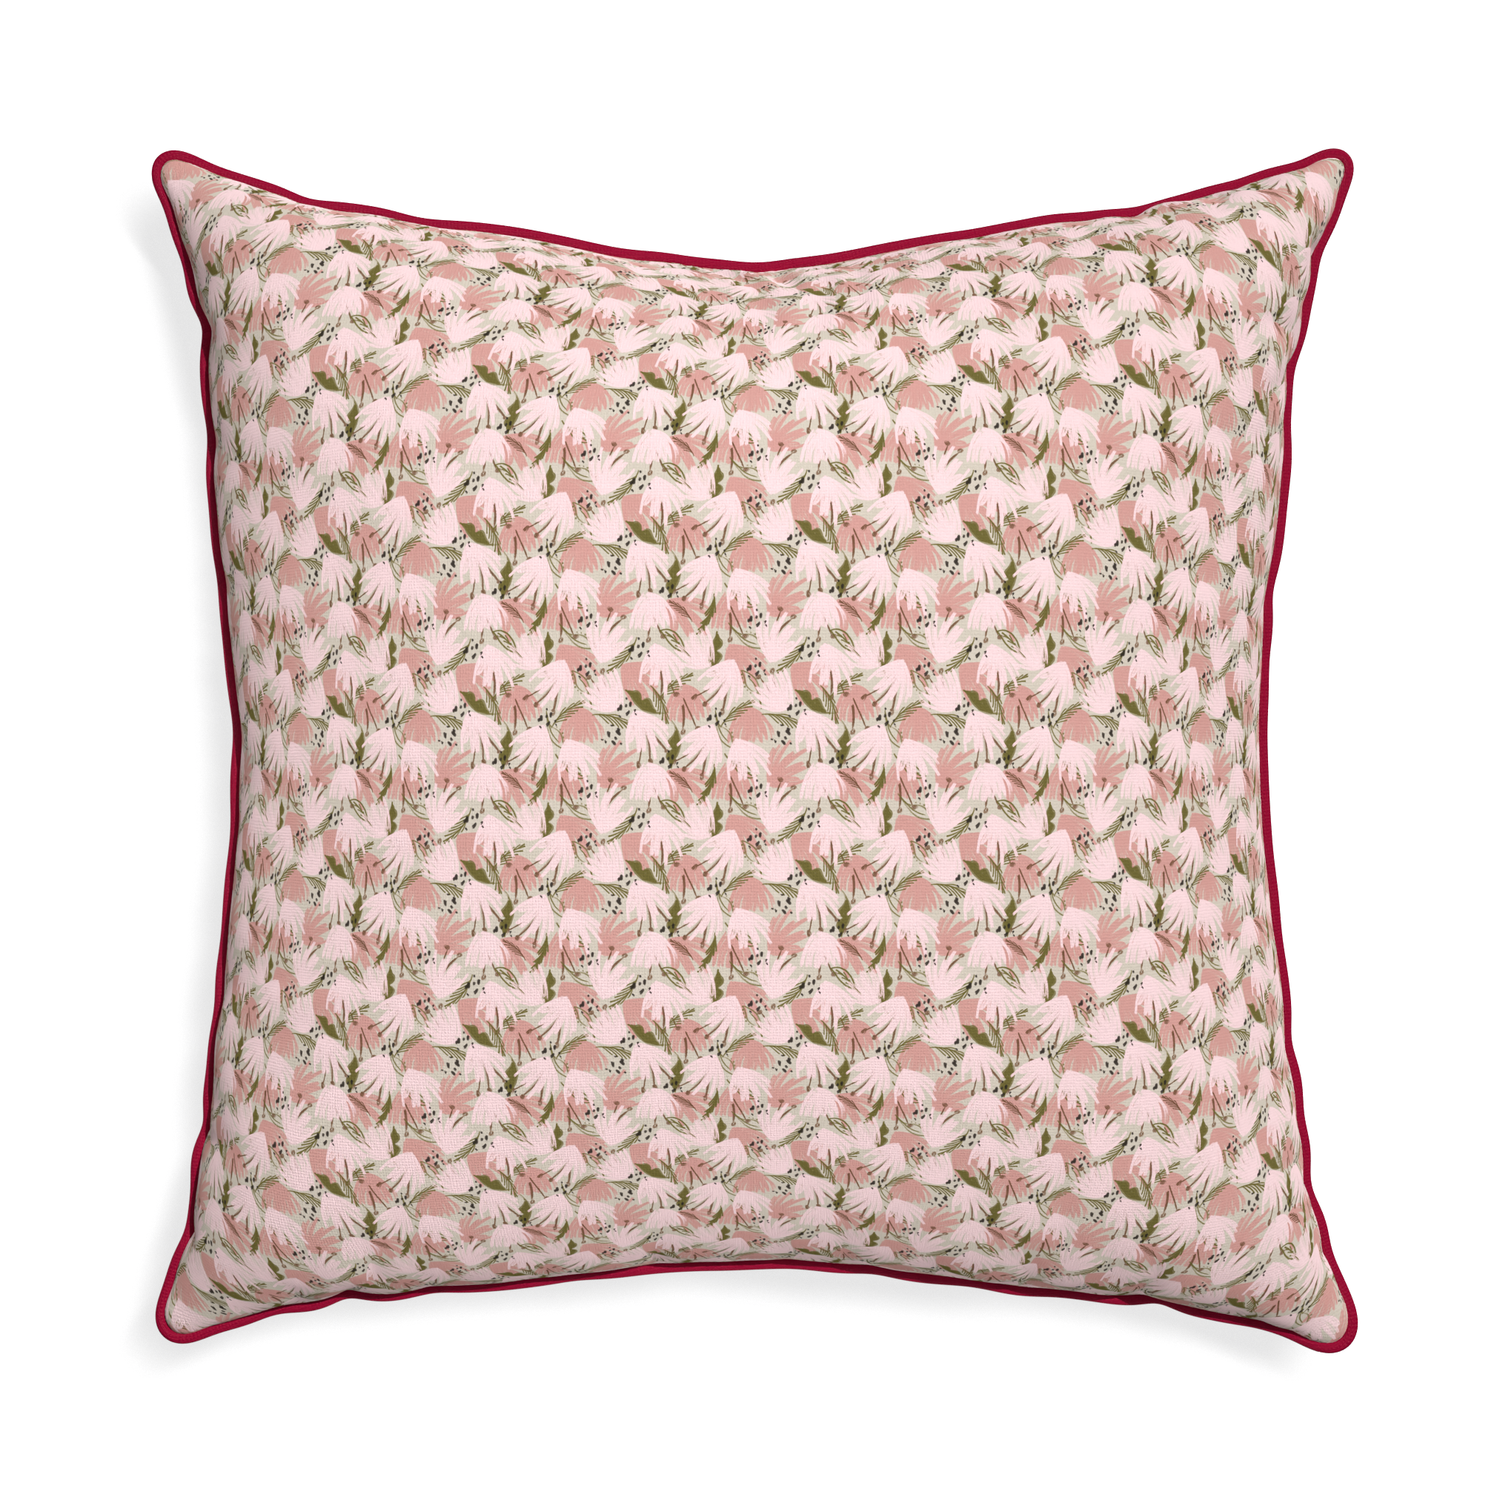 Euro-sham eden pink custom pink floralpillow with raspberry piping on white background